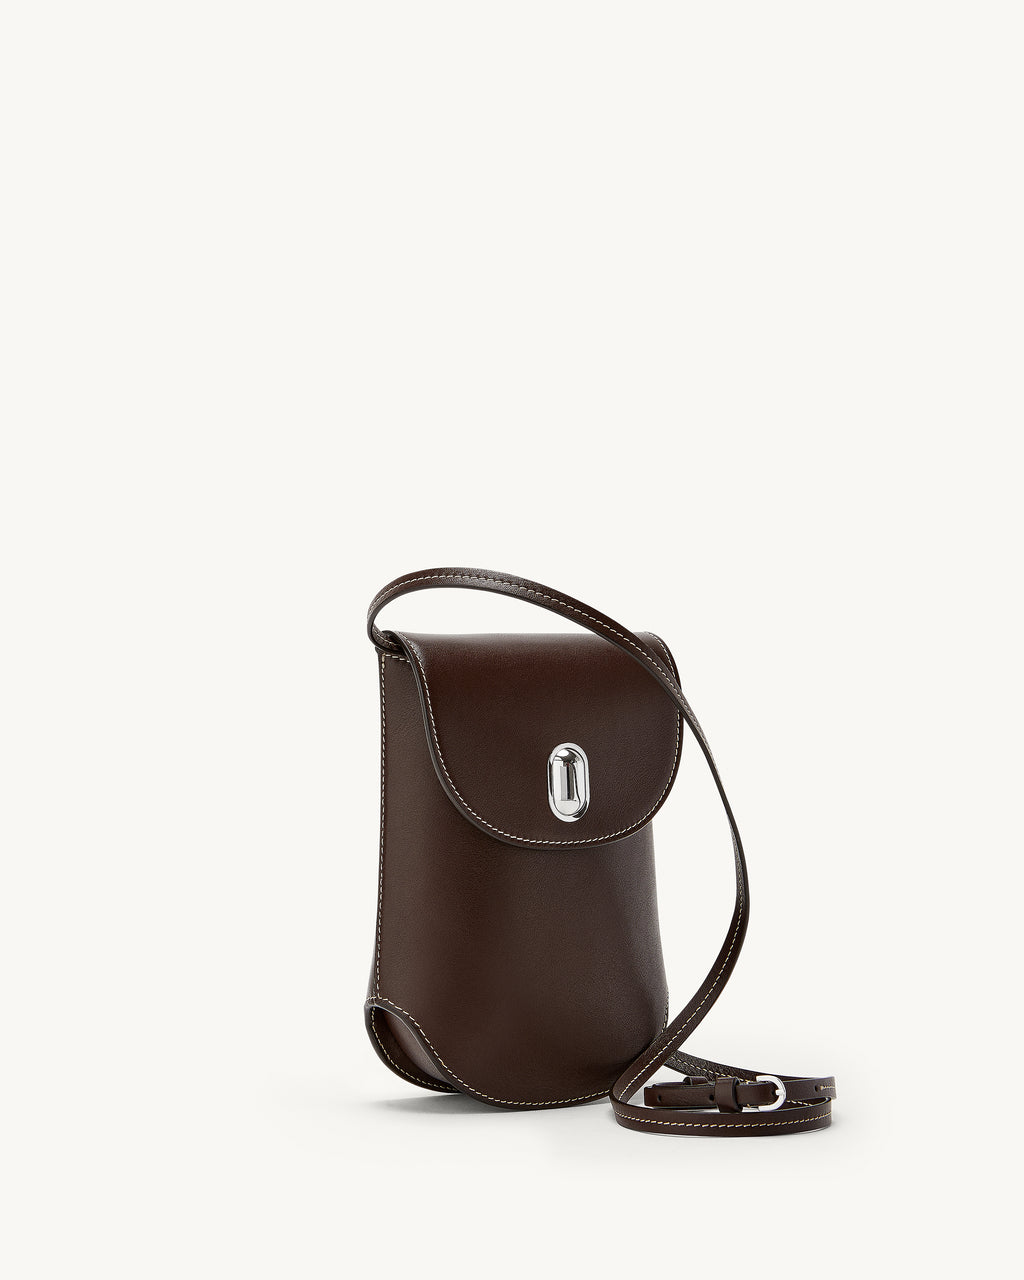 Tondo Pouch in Coffee Leather